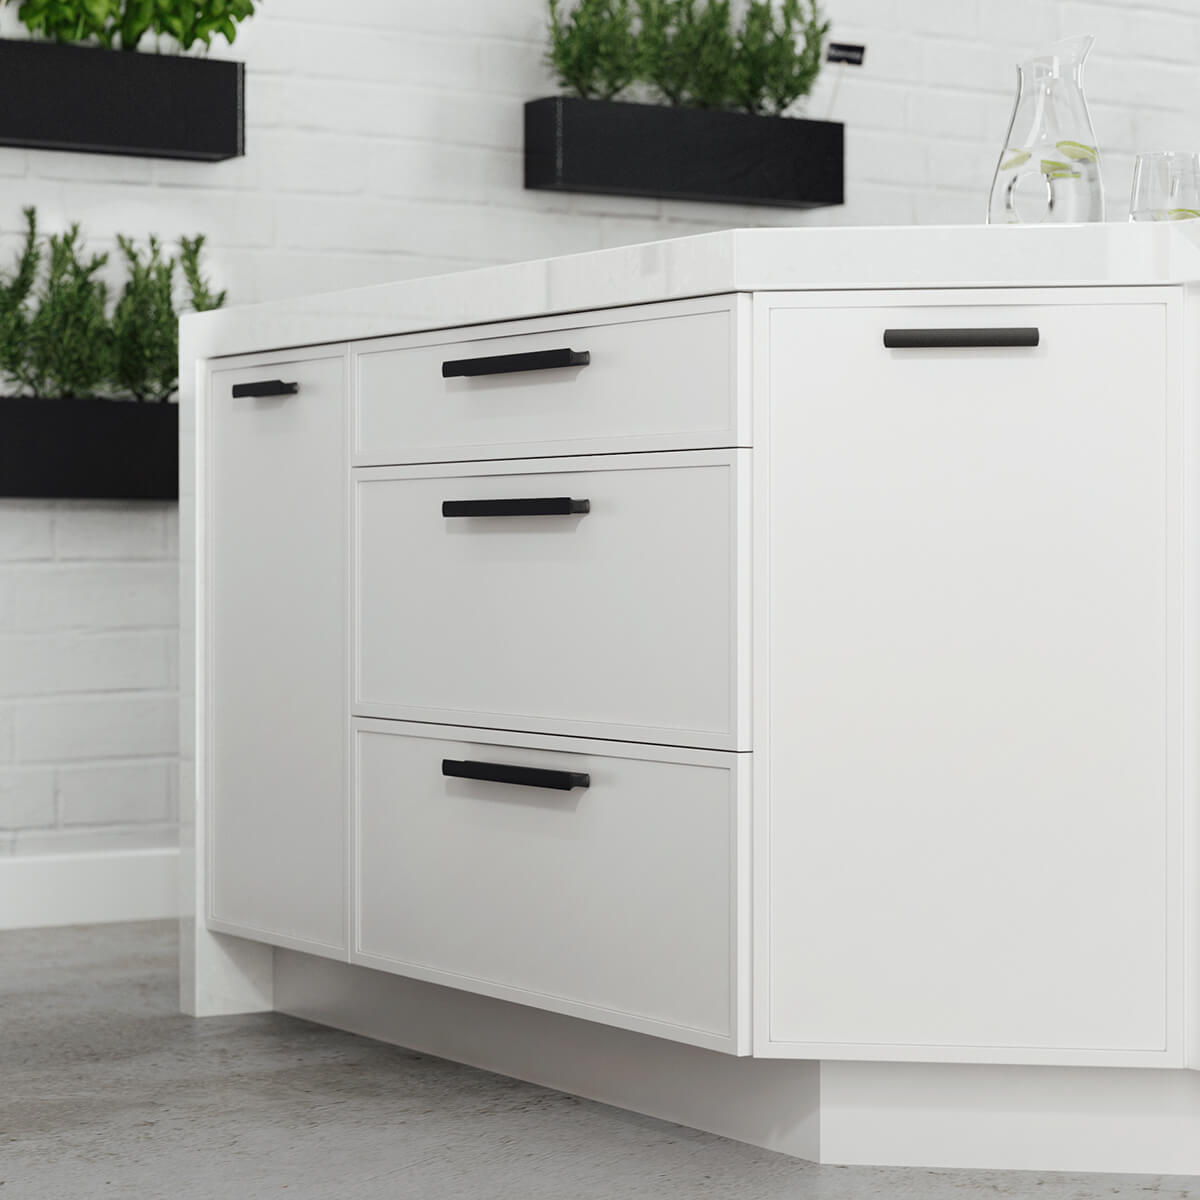 A bright white kitchen island with modern shaker cabinet doors that have skinny stiles and profiles.